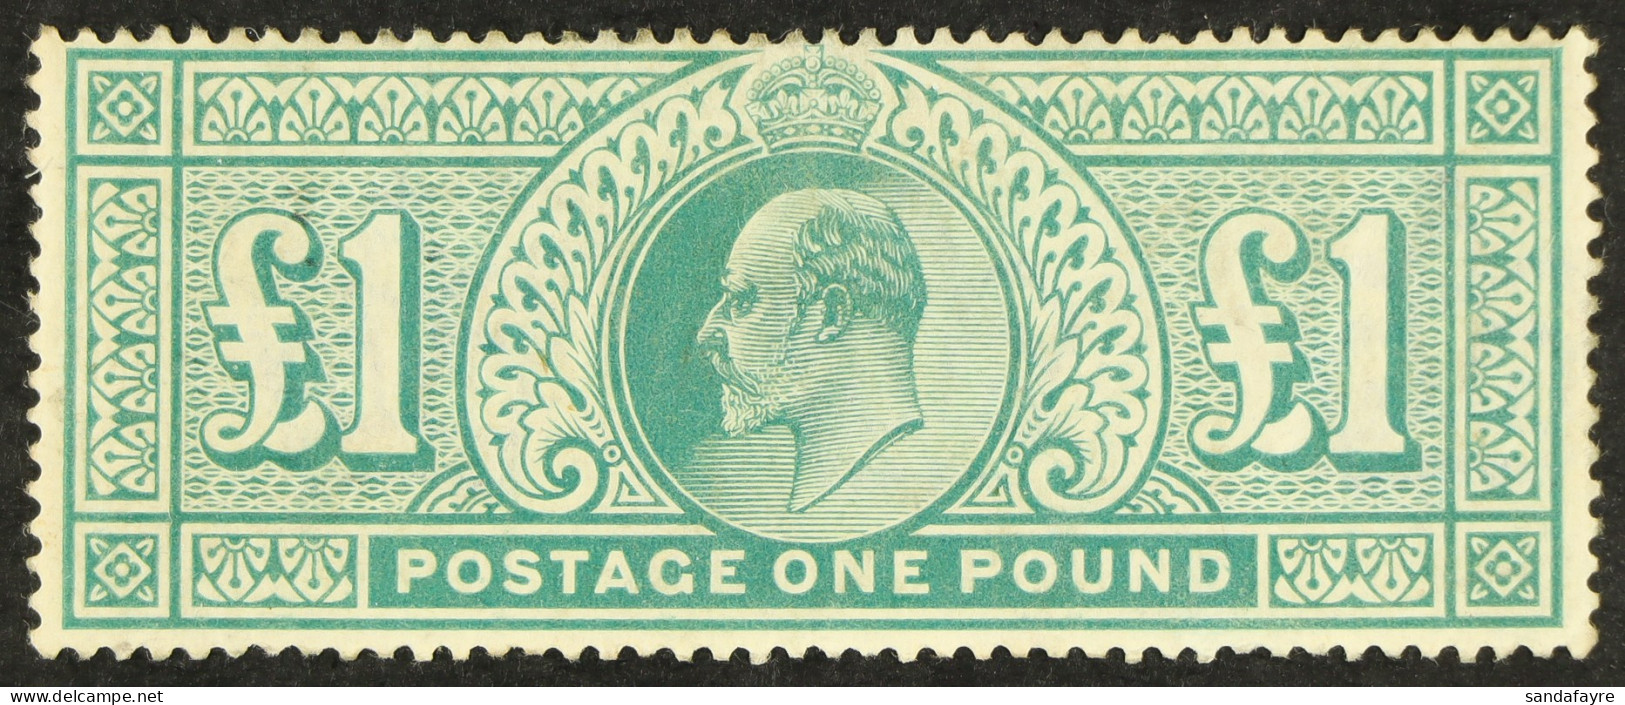 1902-10 Â£1 Dull Blue-green De La Rue Printing, SG 266, Mint Lightly Hinged With A Couple Of Thinned Perfs At Top, Penci - Unclassified